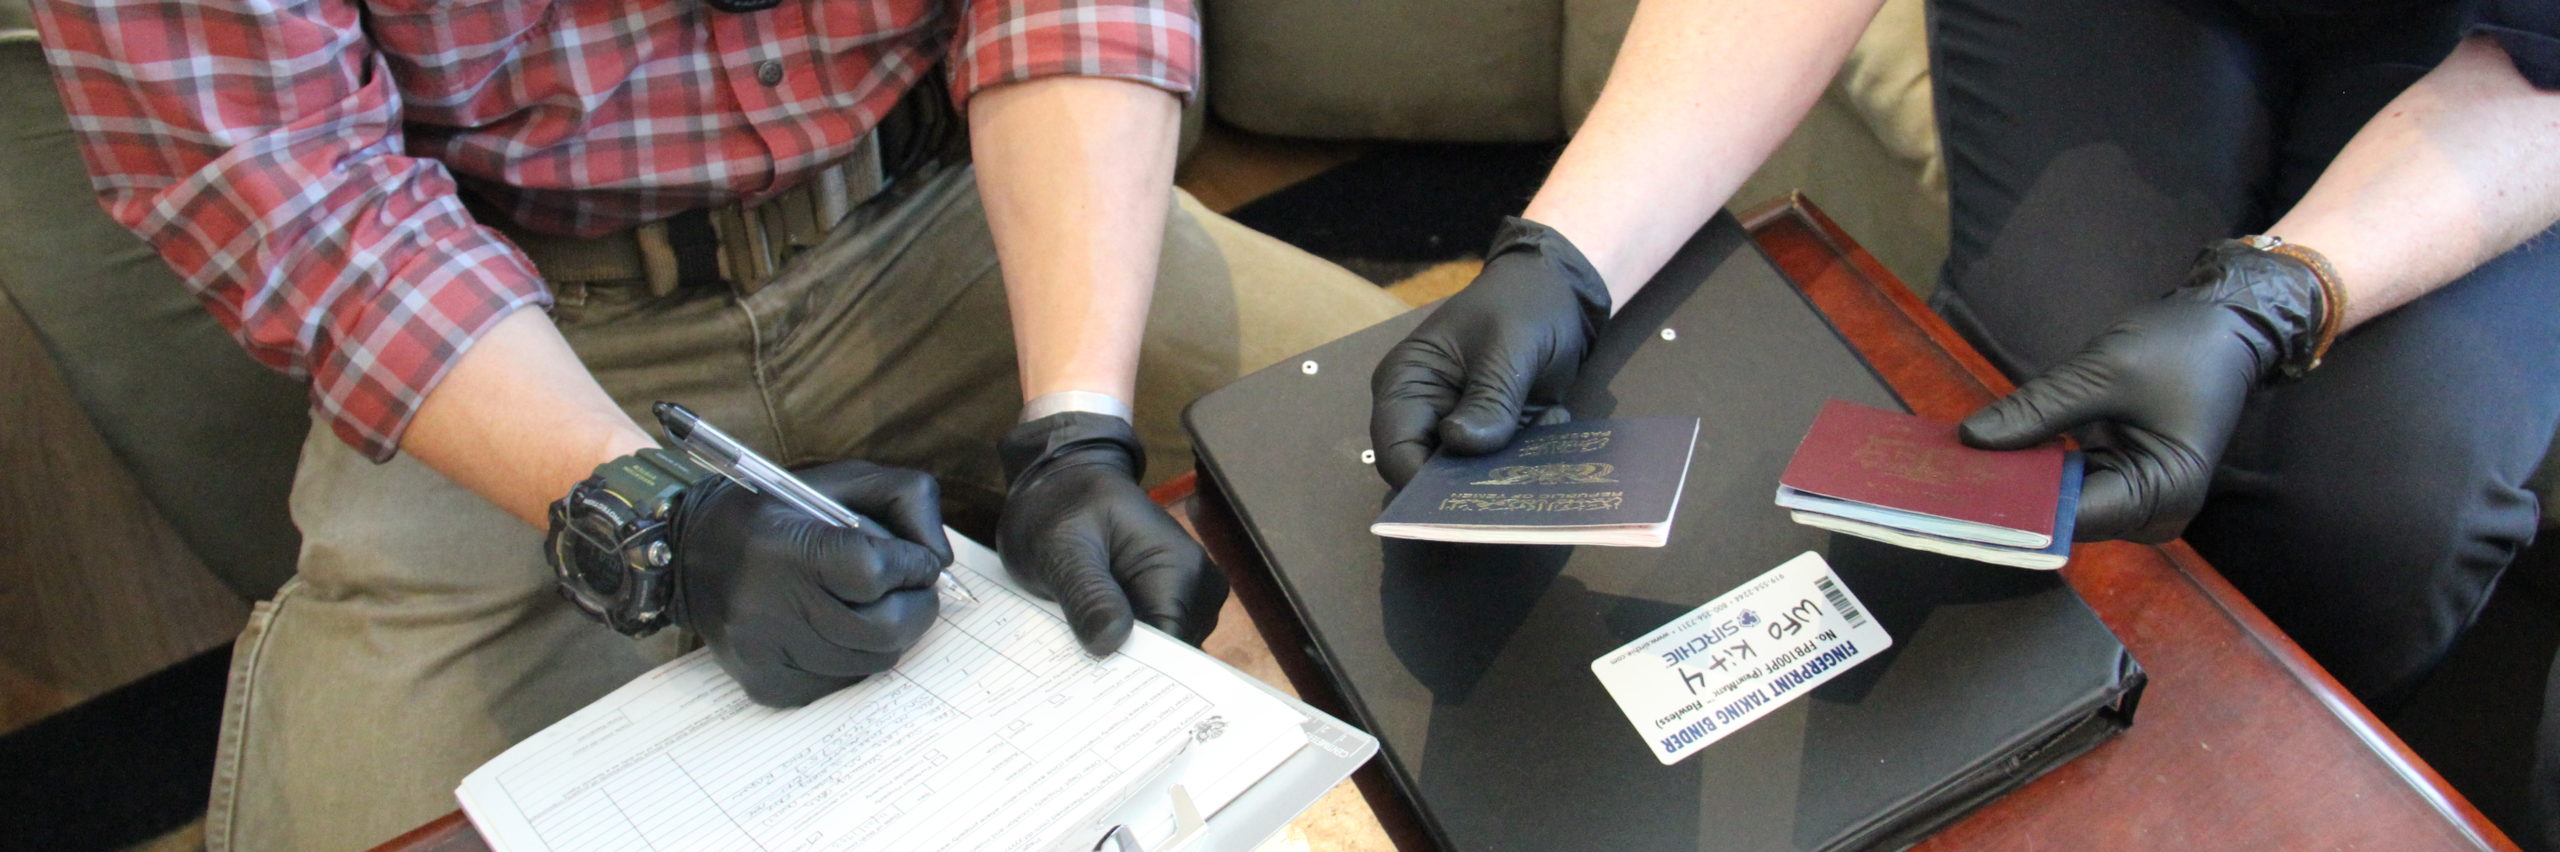 Special agents from the Diplomatic Security Service Washington Field Office demonstrate evidence collection, Feb. 28, 2019. (U.S. Department of State photo)